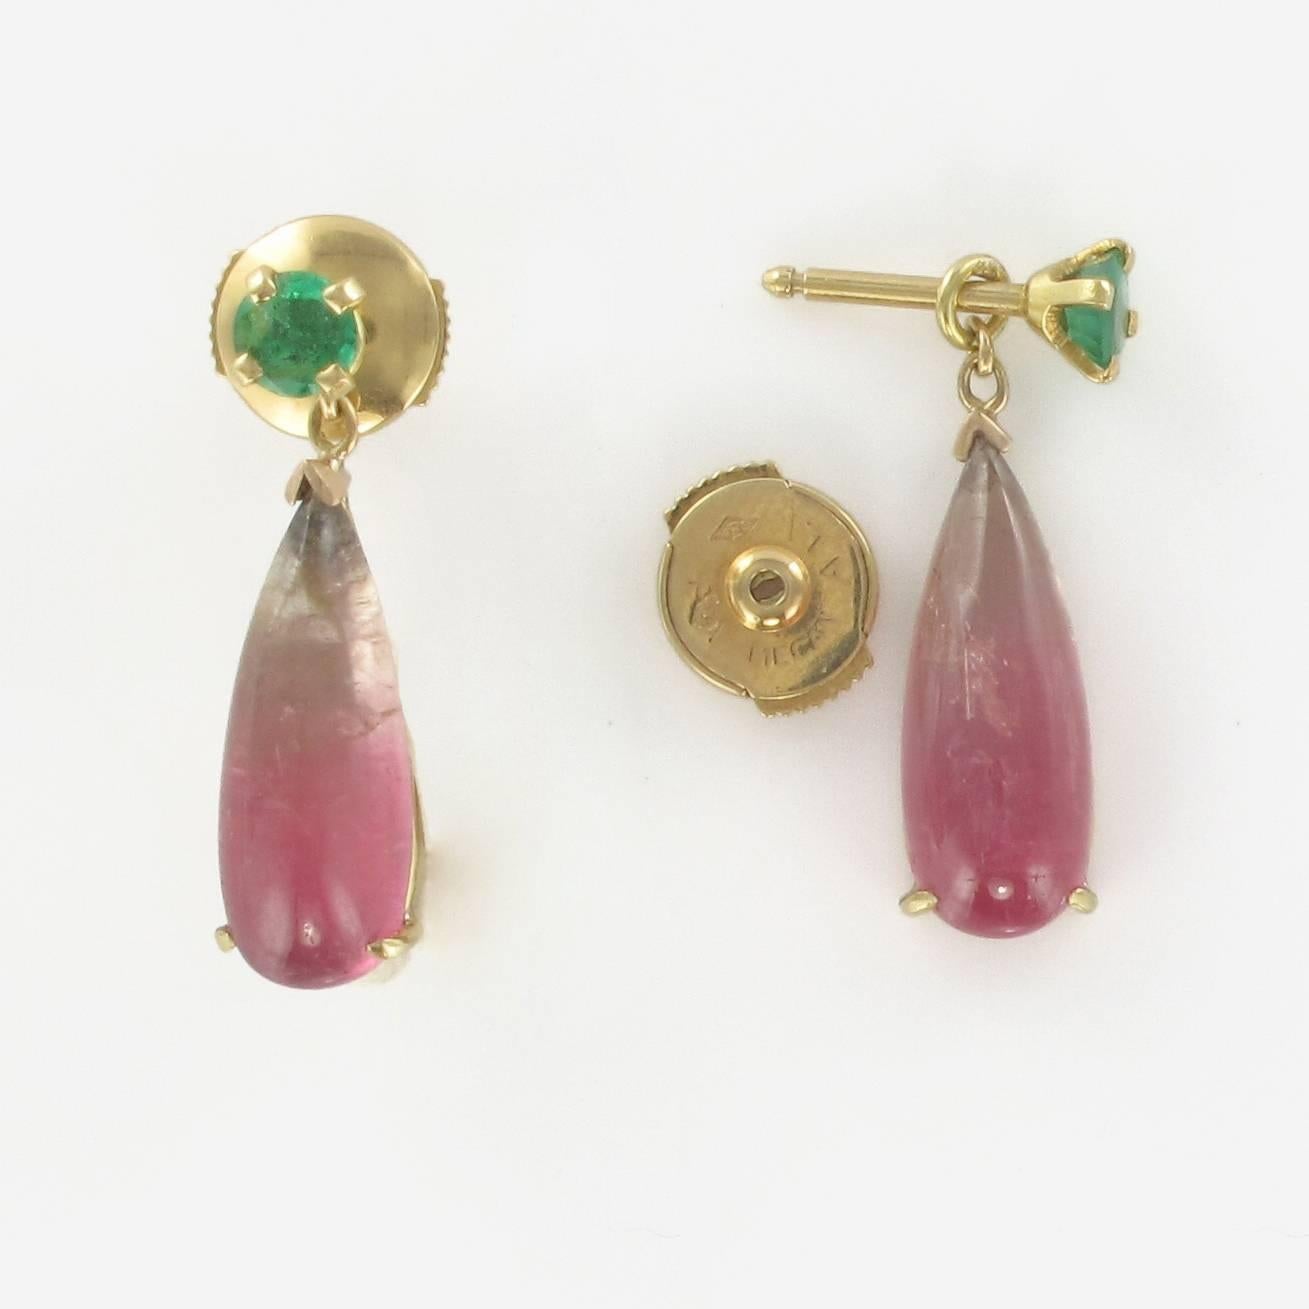 Baume creation - unique piece.
Earrings in 18 carat yellow gold, eagle head hallmark. 
These charming earrings are composed of yellow gold stud earrings each set with a round facetted emerald. A Melon Tourmaline cabochon teardrop is suspended from